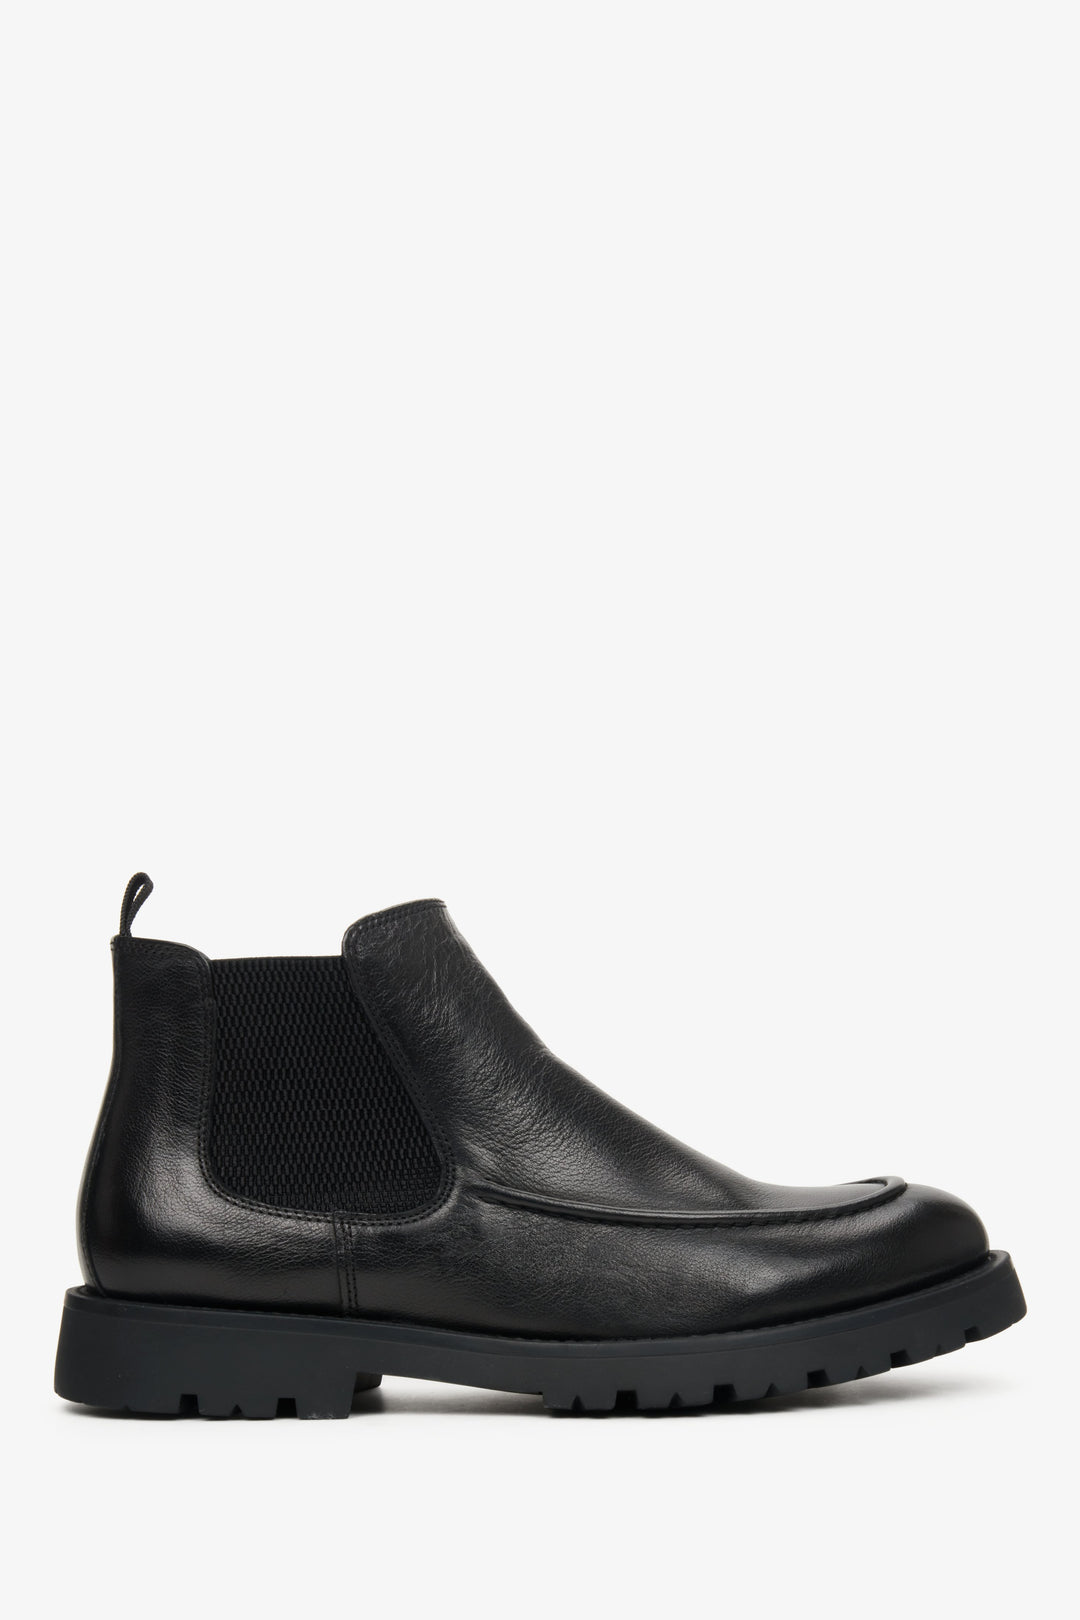 Men's Black Low-cut Ankle Boots made of Genuine Leather Estro ER00112137.